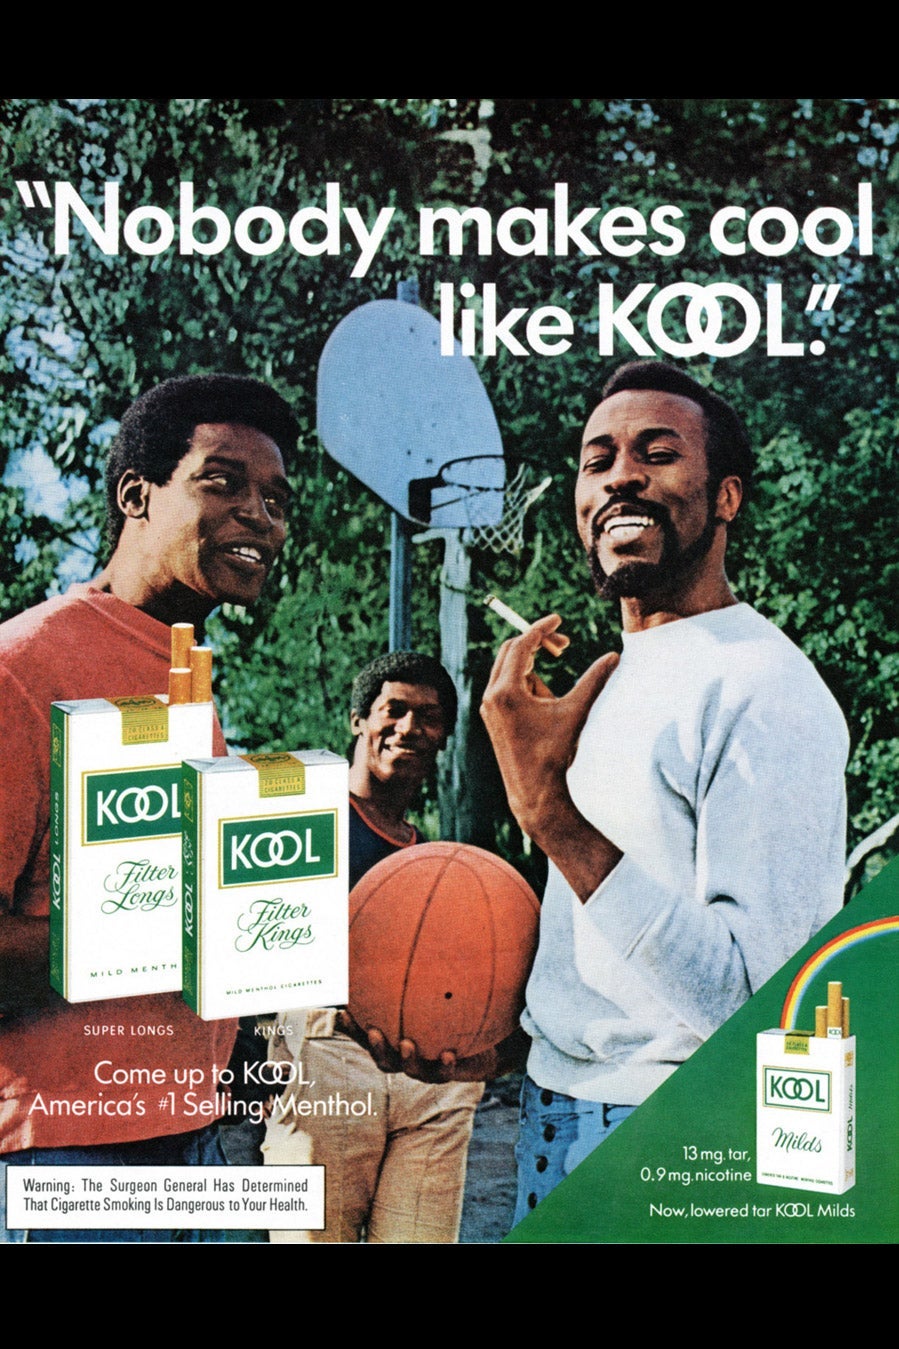 Three men in a basketball-themed ad for KOOL cigarettes.